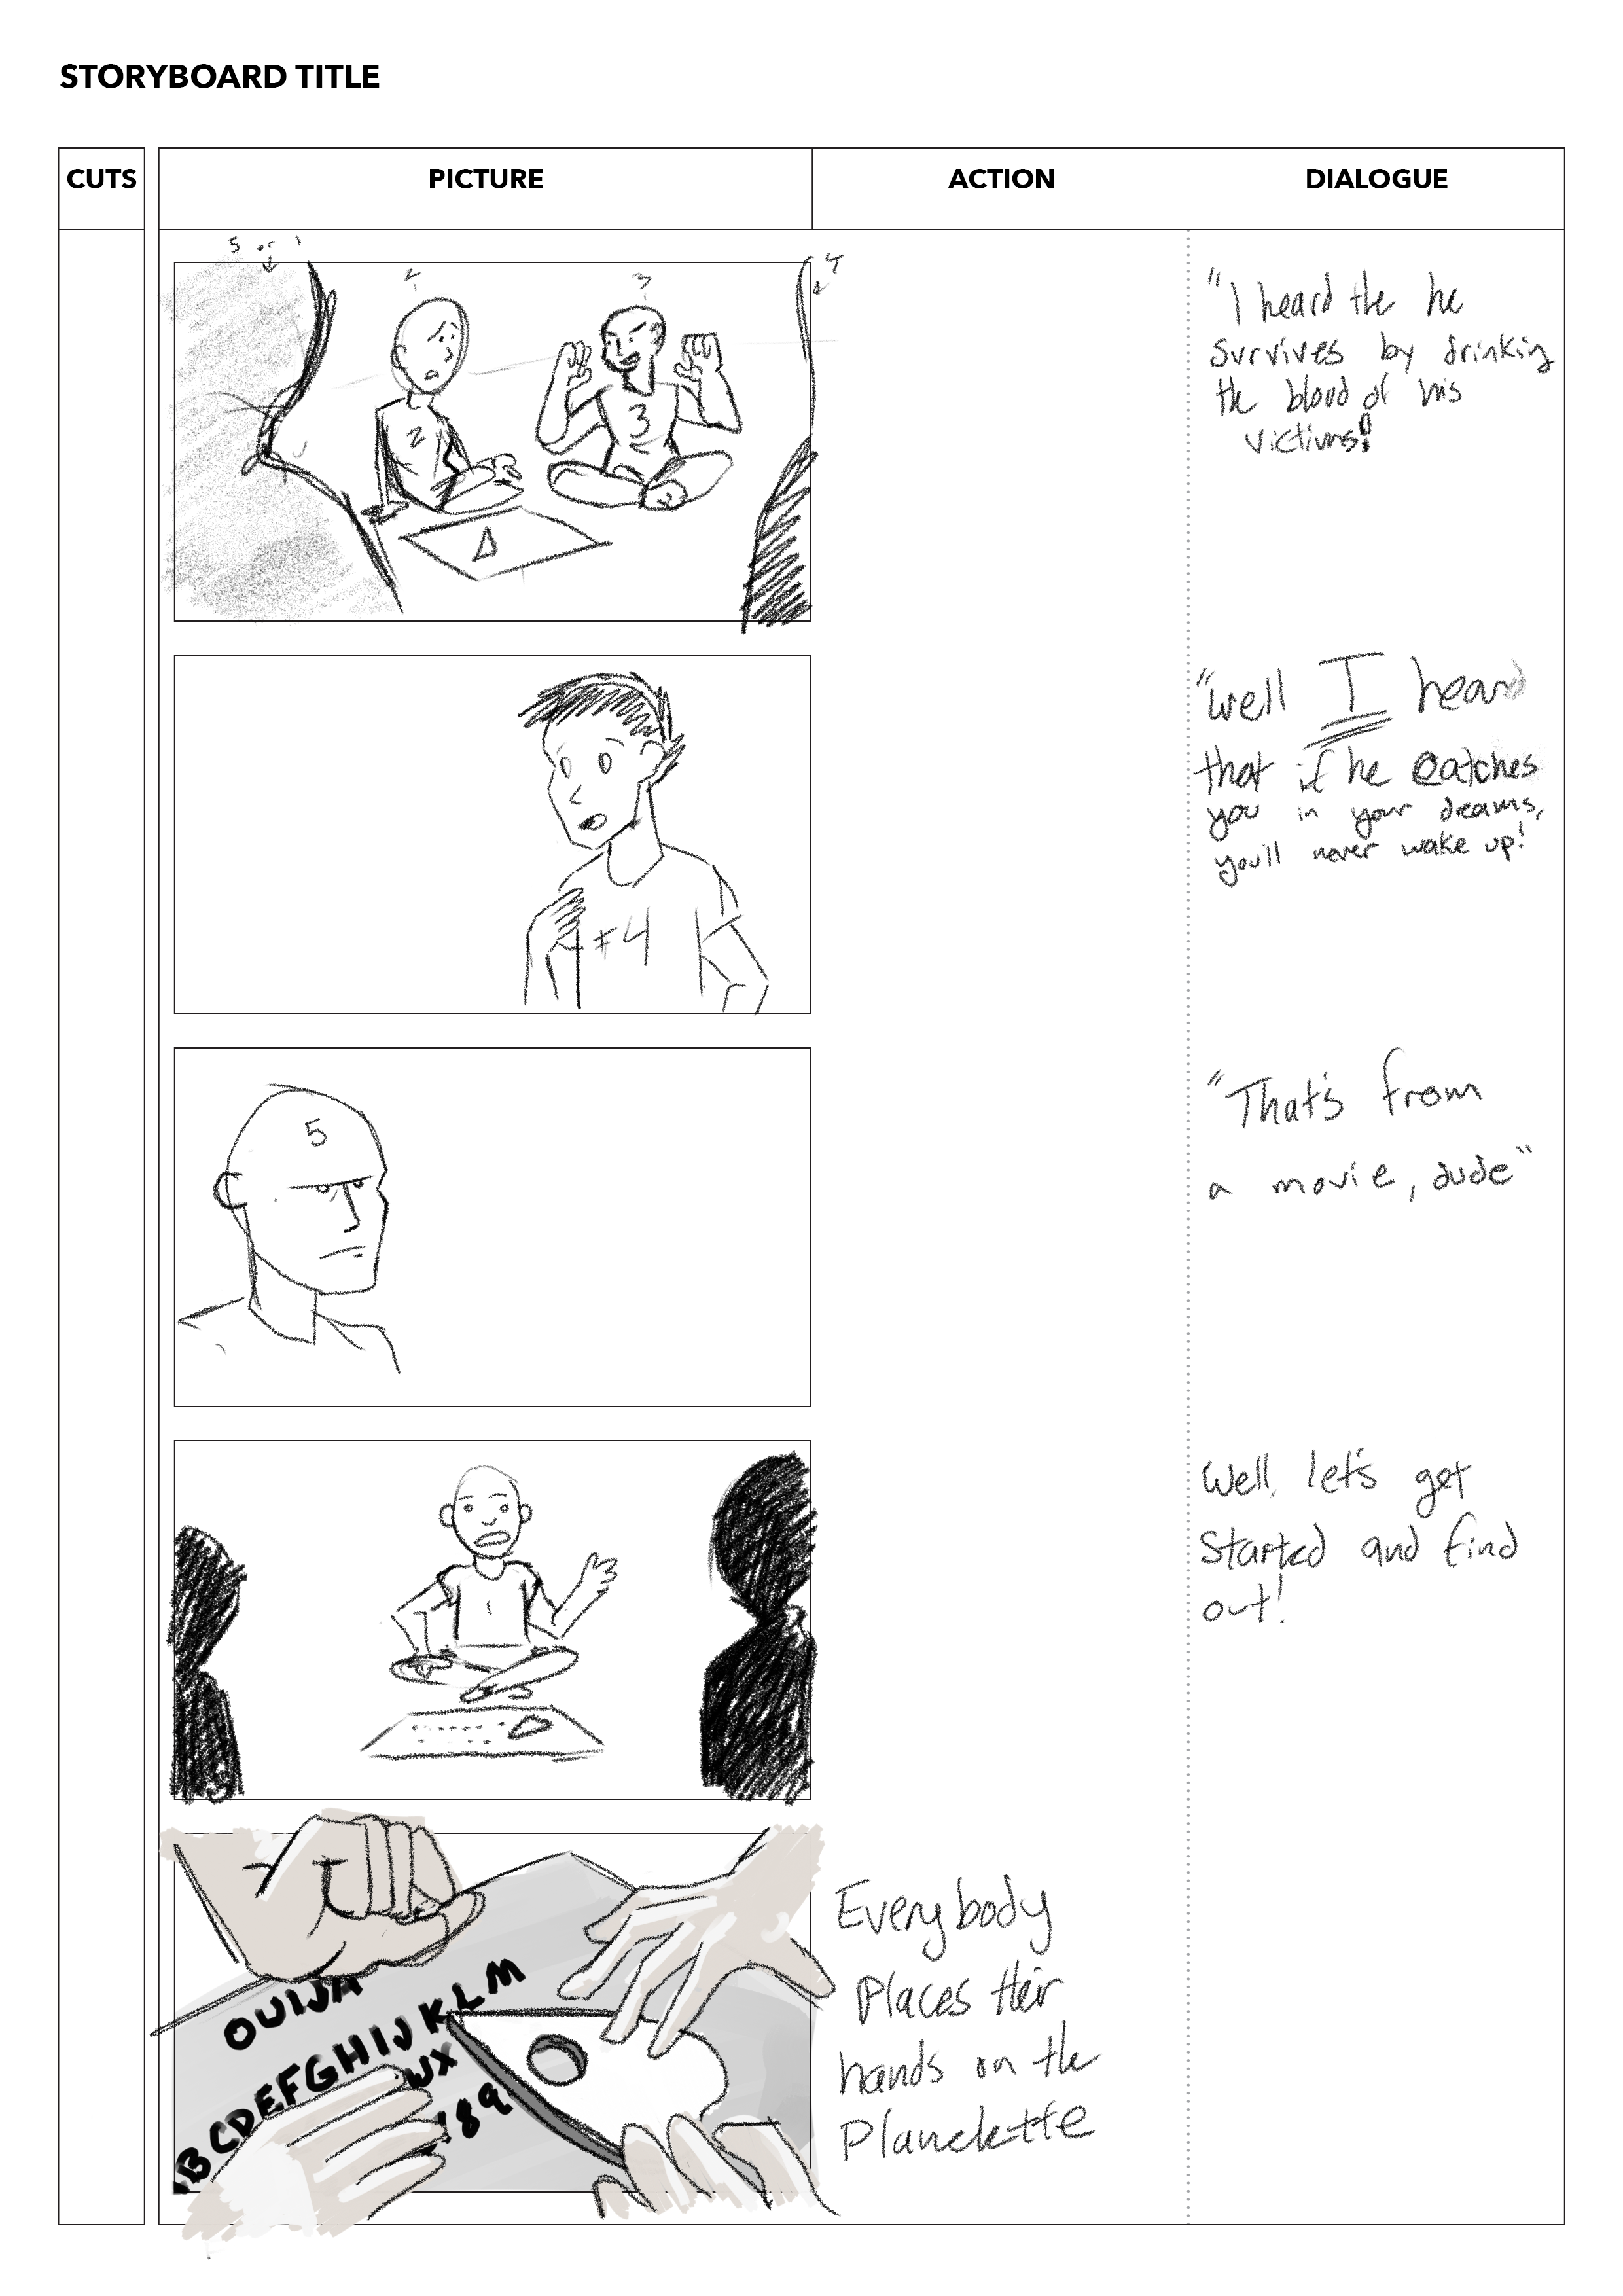 16_9_Storyboard_Template_page 2.png